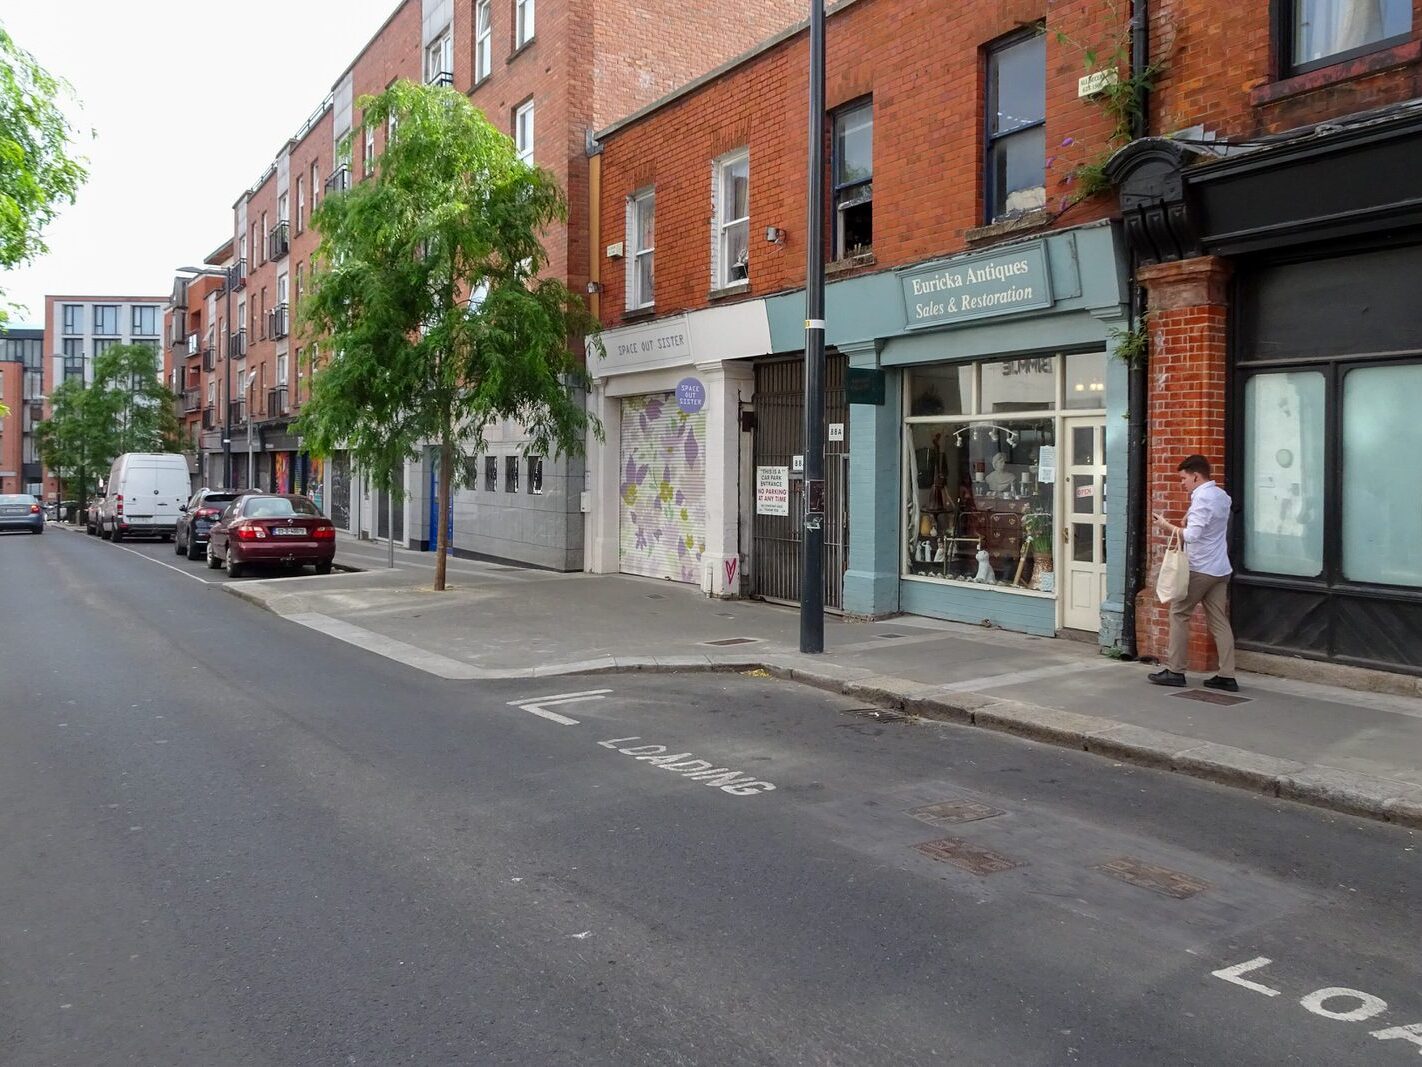 THE FRANCIS STREET UPGRADE HAS BEEN A HUGE A SUCCESS [MEATH STREET IS NEXT FOR AN UPGRADE]-236798-1